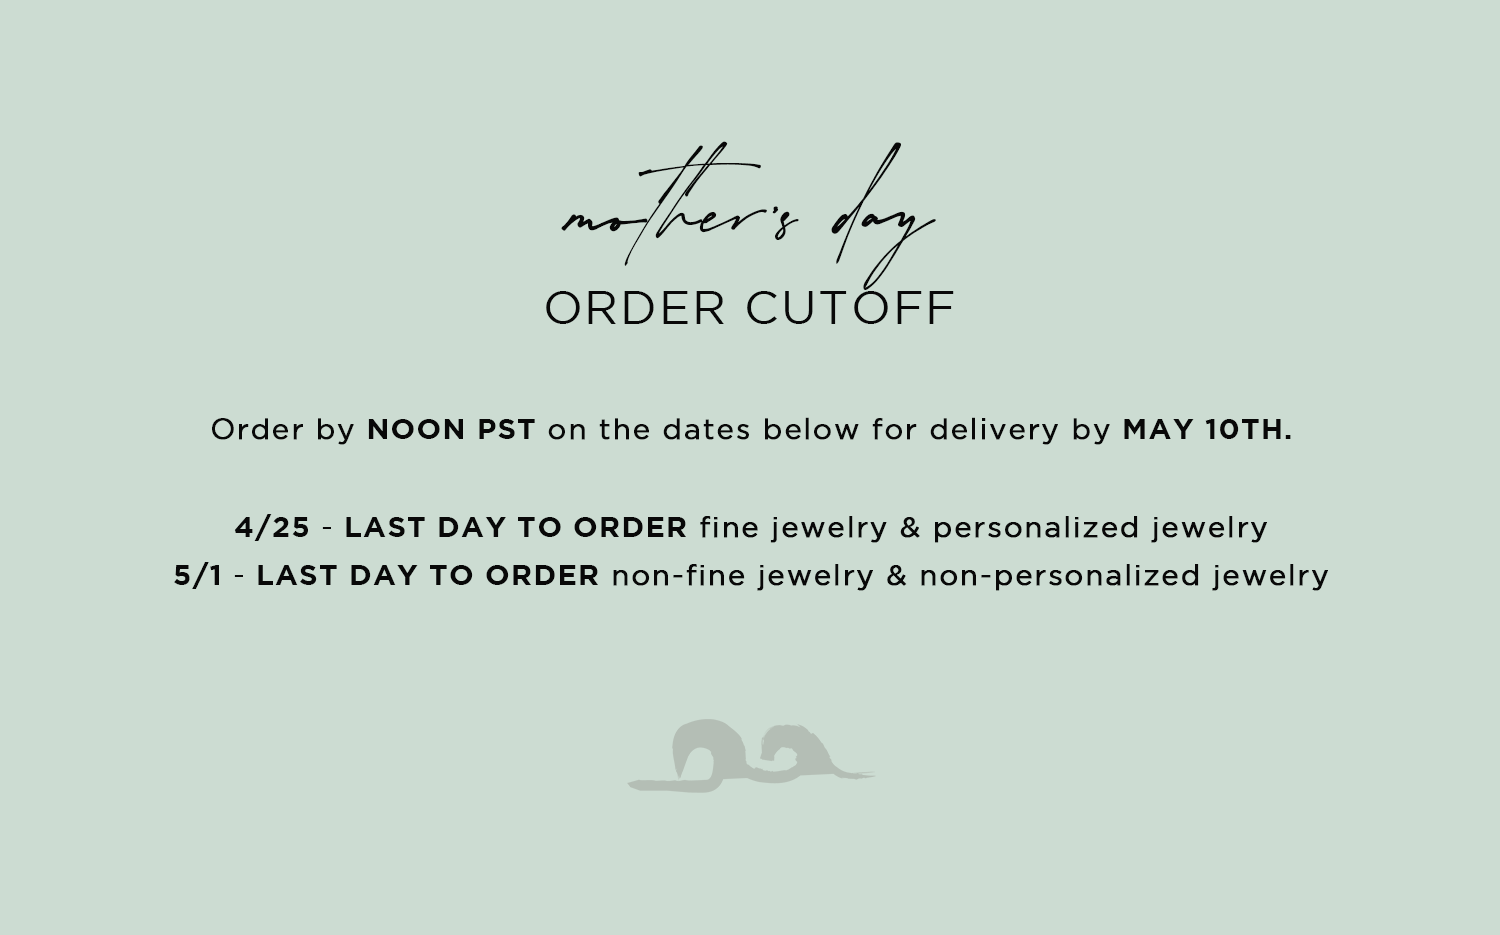 Mother's Day Order Cut Off